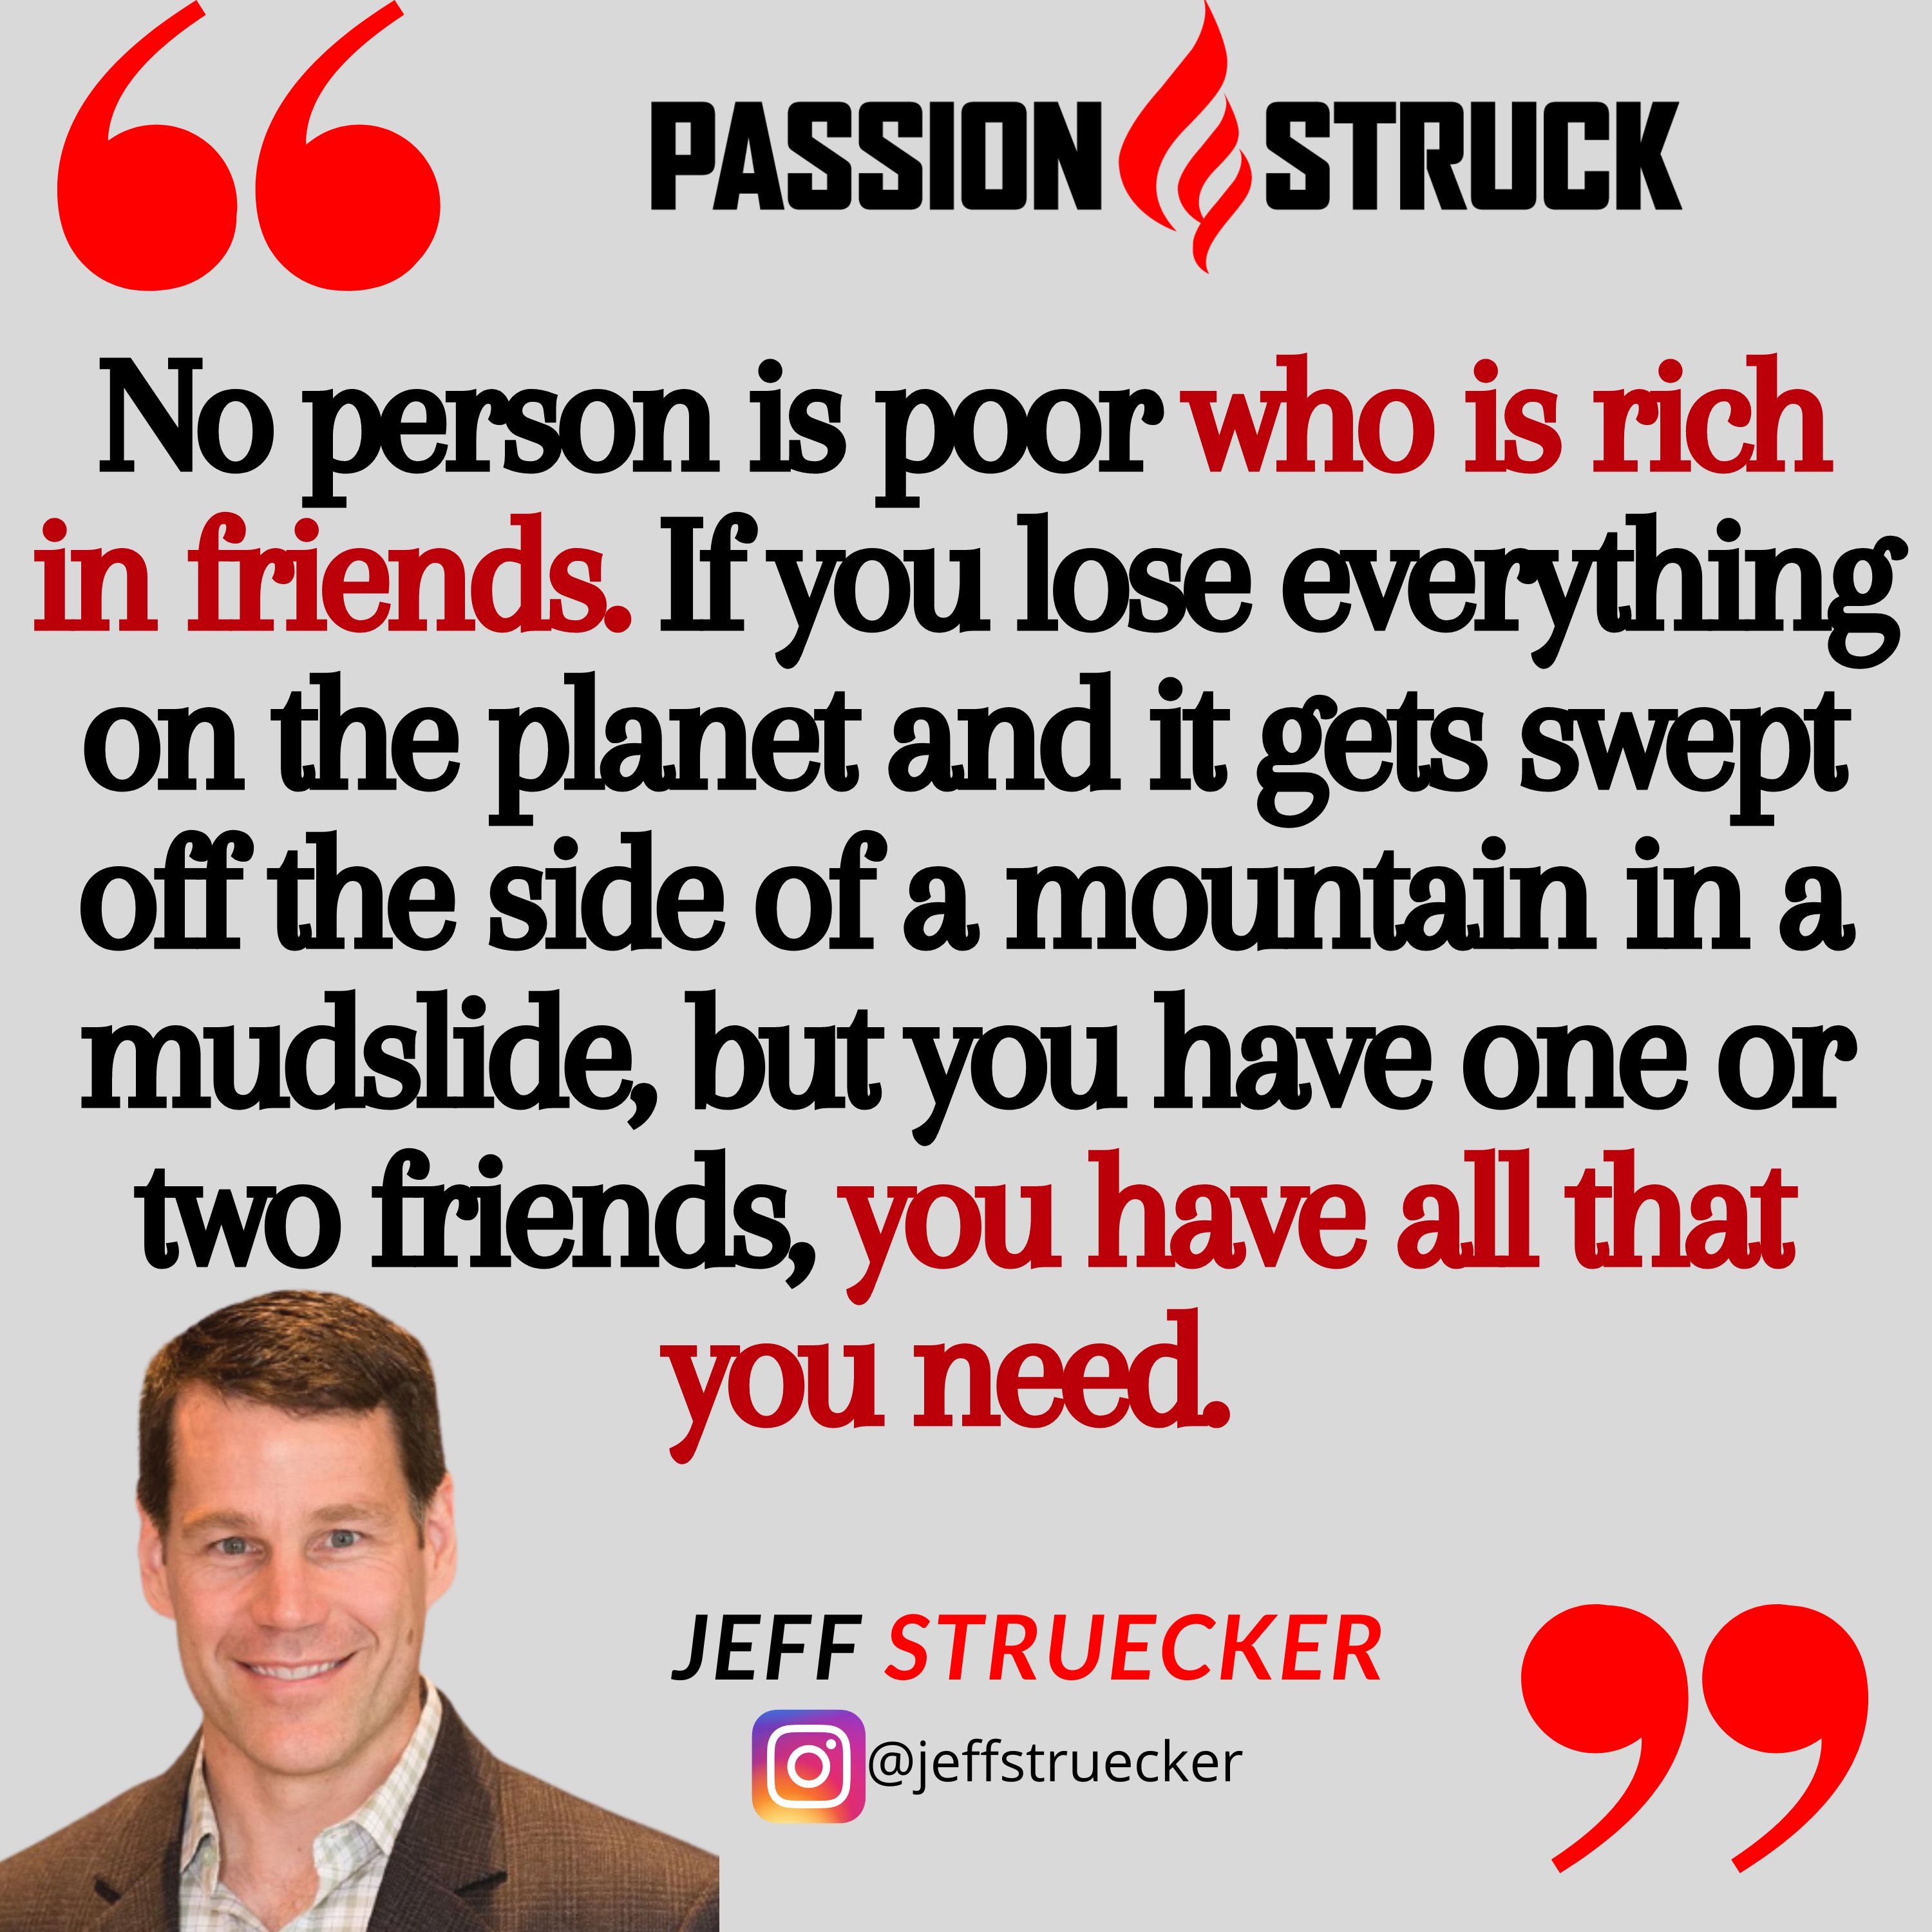 Jeff Struecker quote from the passion struck podacast: No person is poor who is rich in friends.